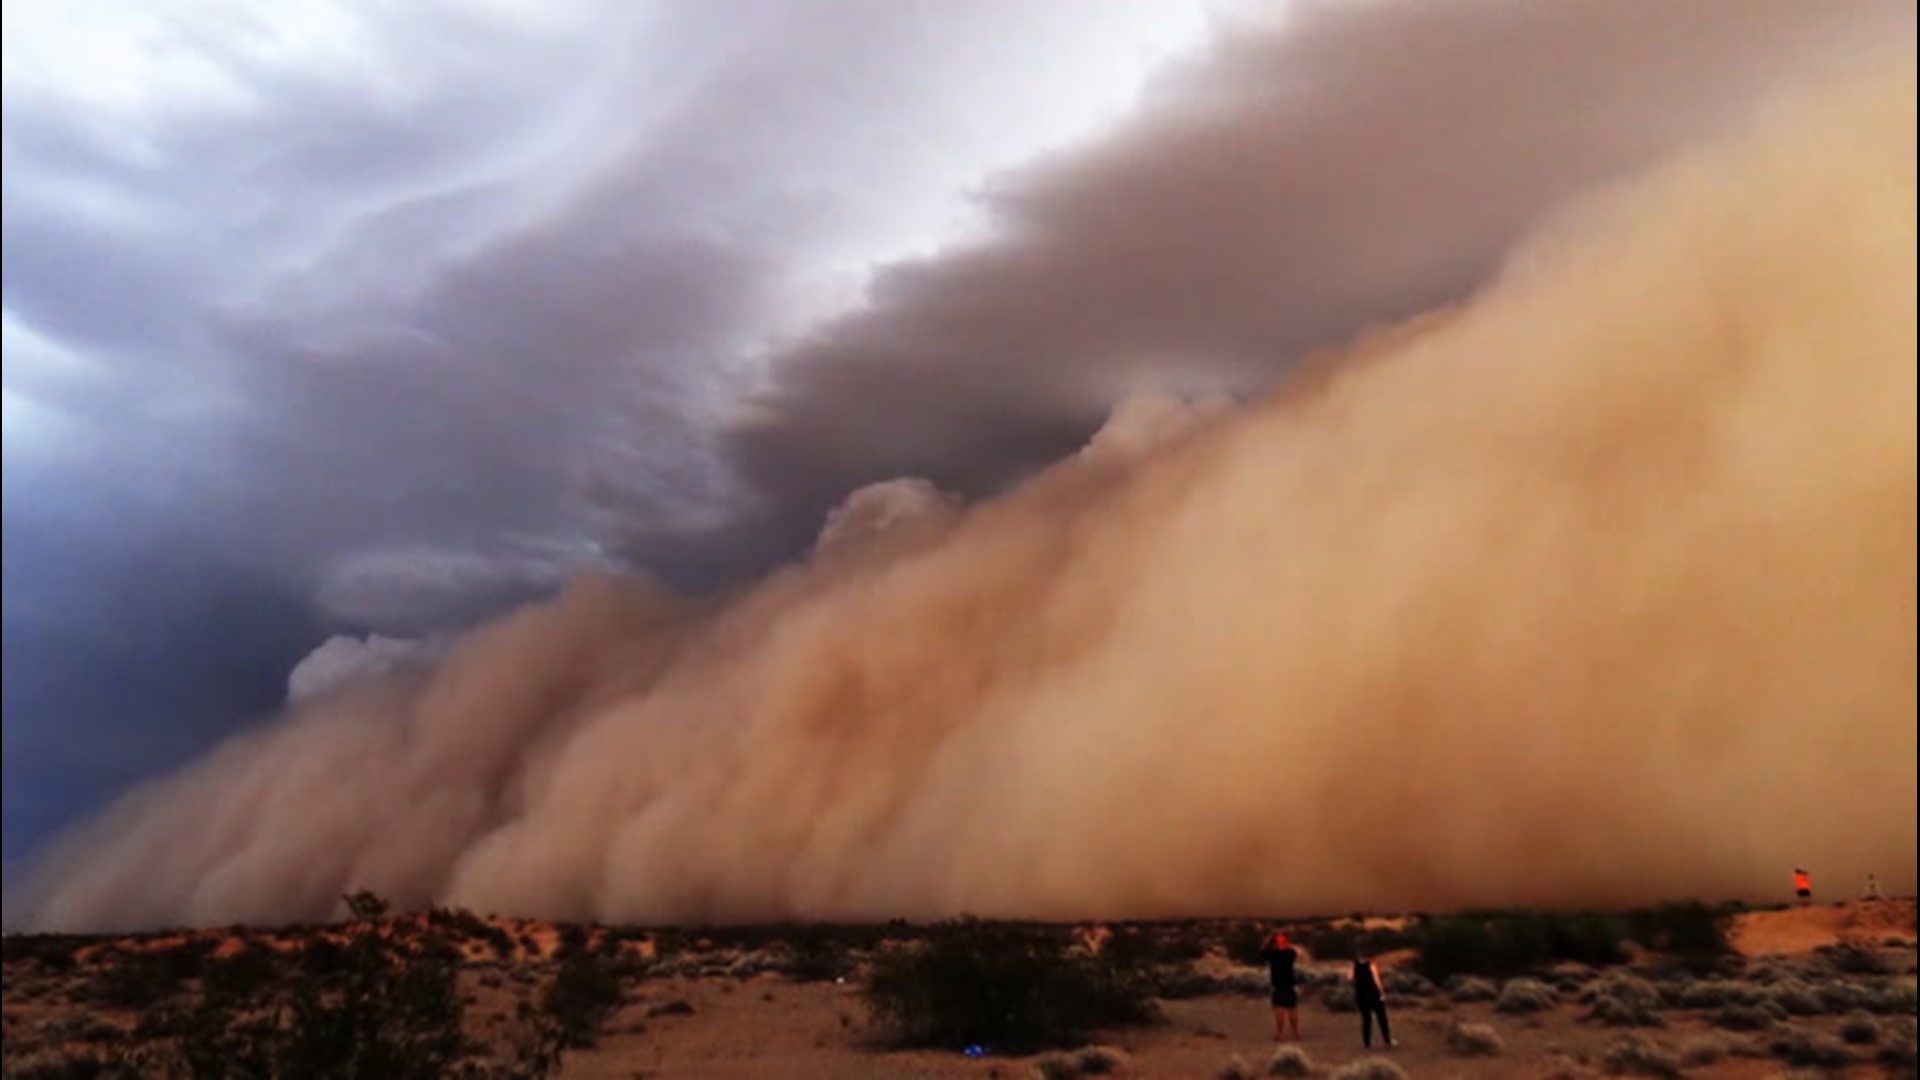 A $6.5 million project is using automated technology to warn drivers in Arizona of incoming dust storms, which can quickly lead to dangerous driving conditions.